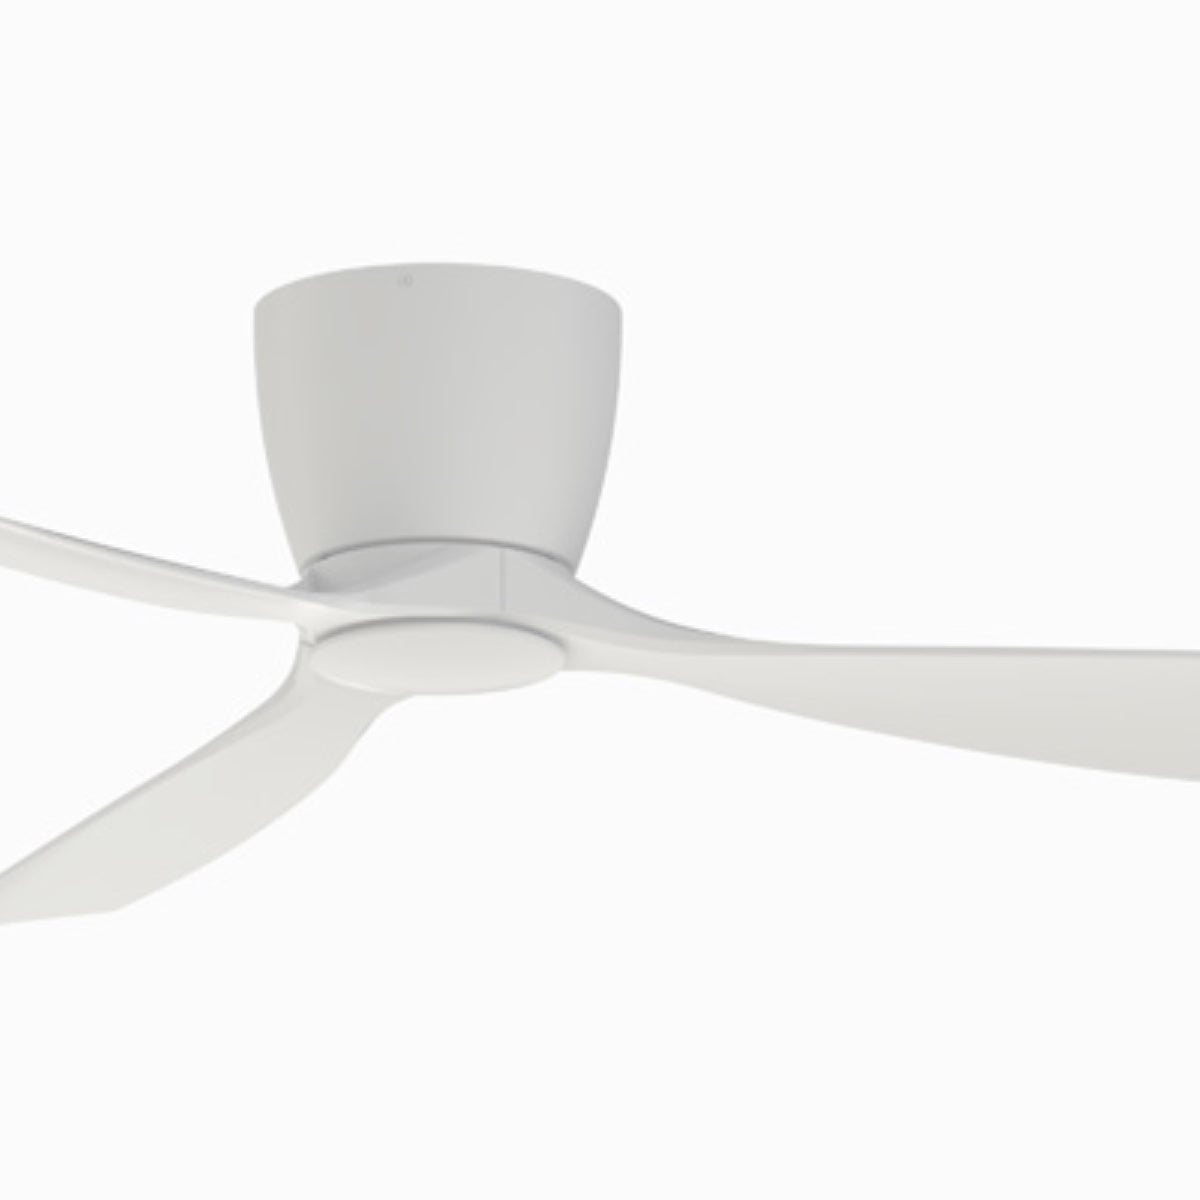 Klinch 44 Inch Low Profile Outdoor Ceiling Fan With Light and Remote - Bees Lighting